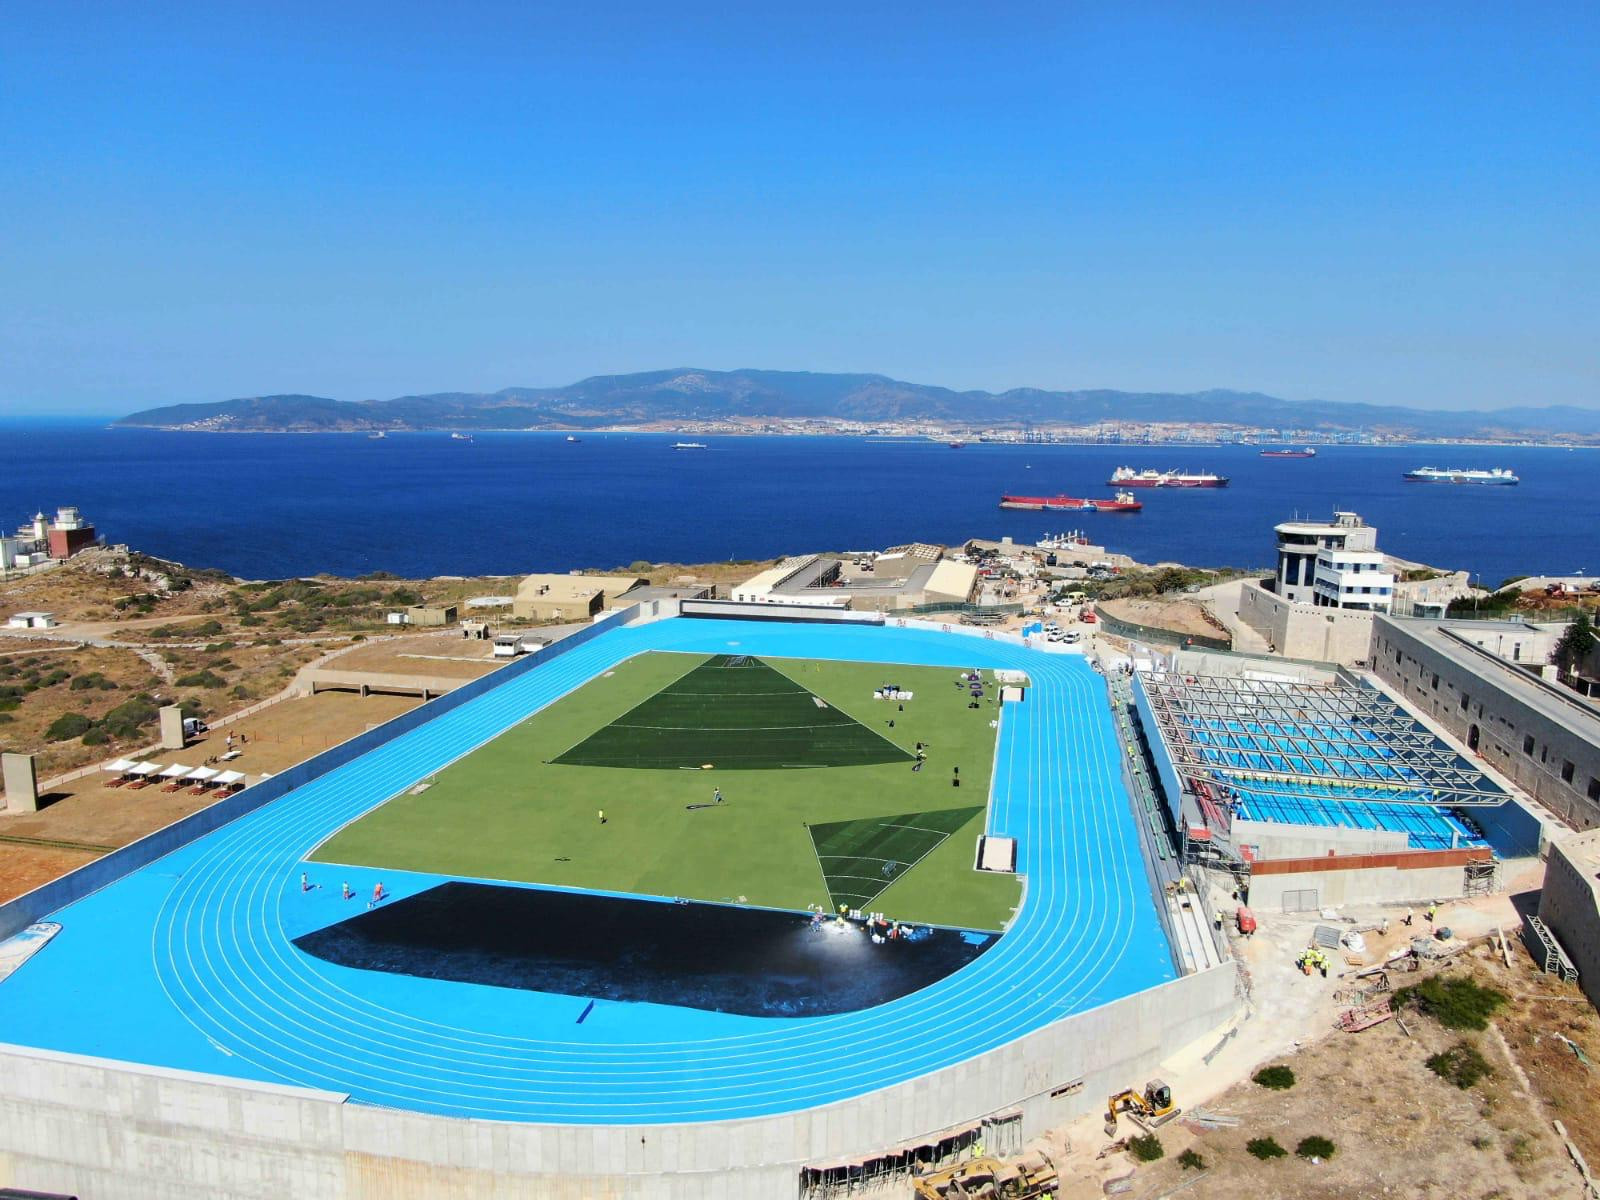 Gibraltar possesses a spectacular location for the athletics competition ©IIGA/Twitter